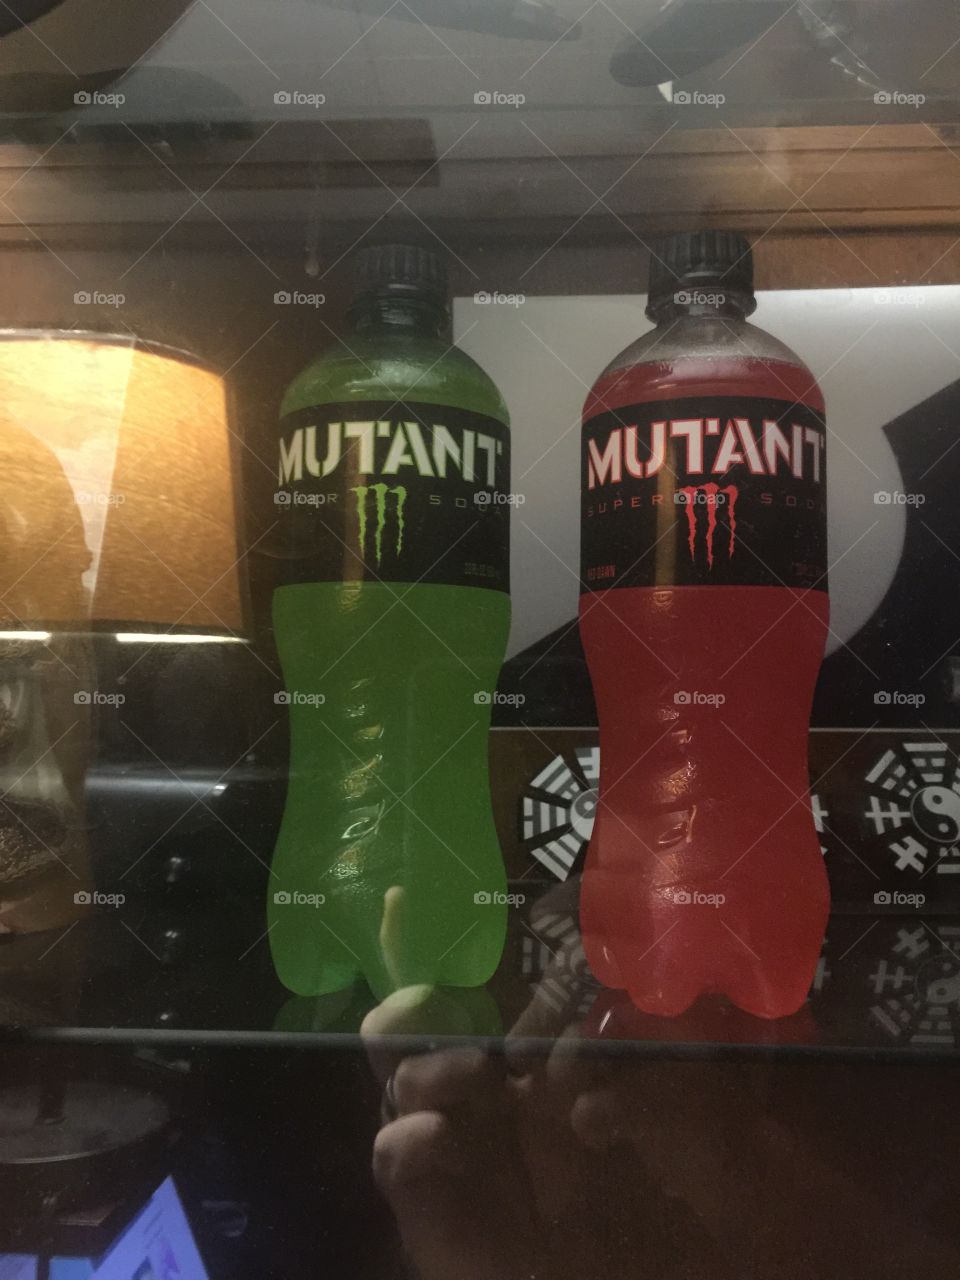 Behold the mutants